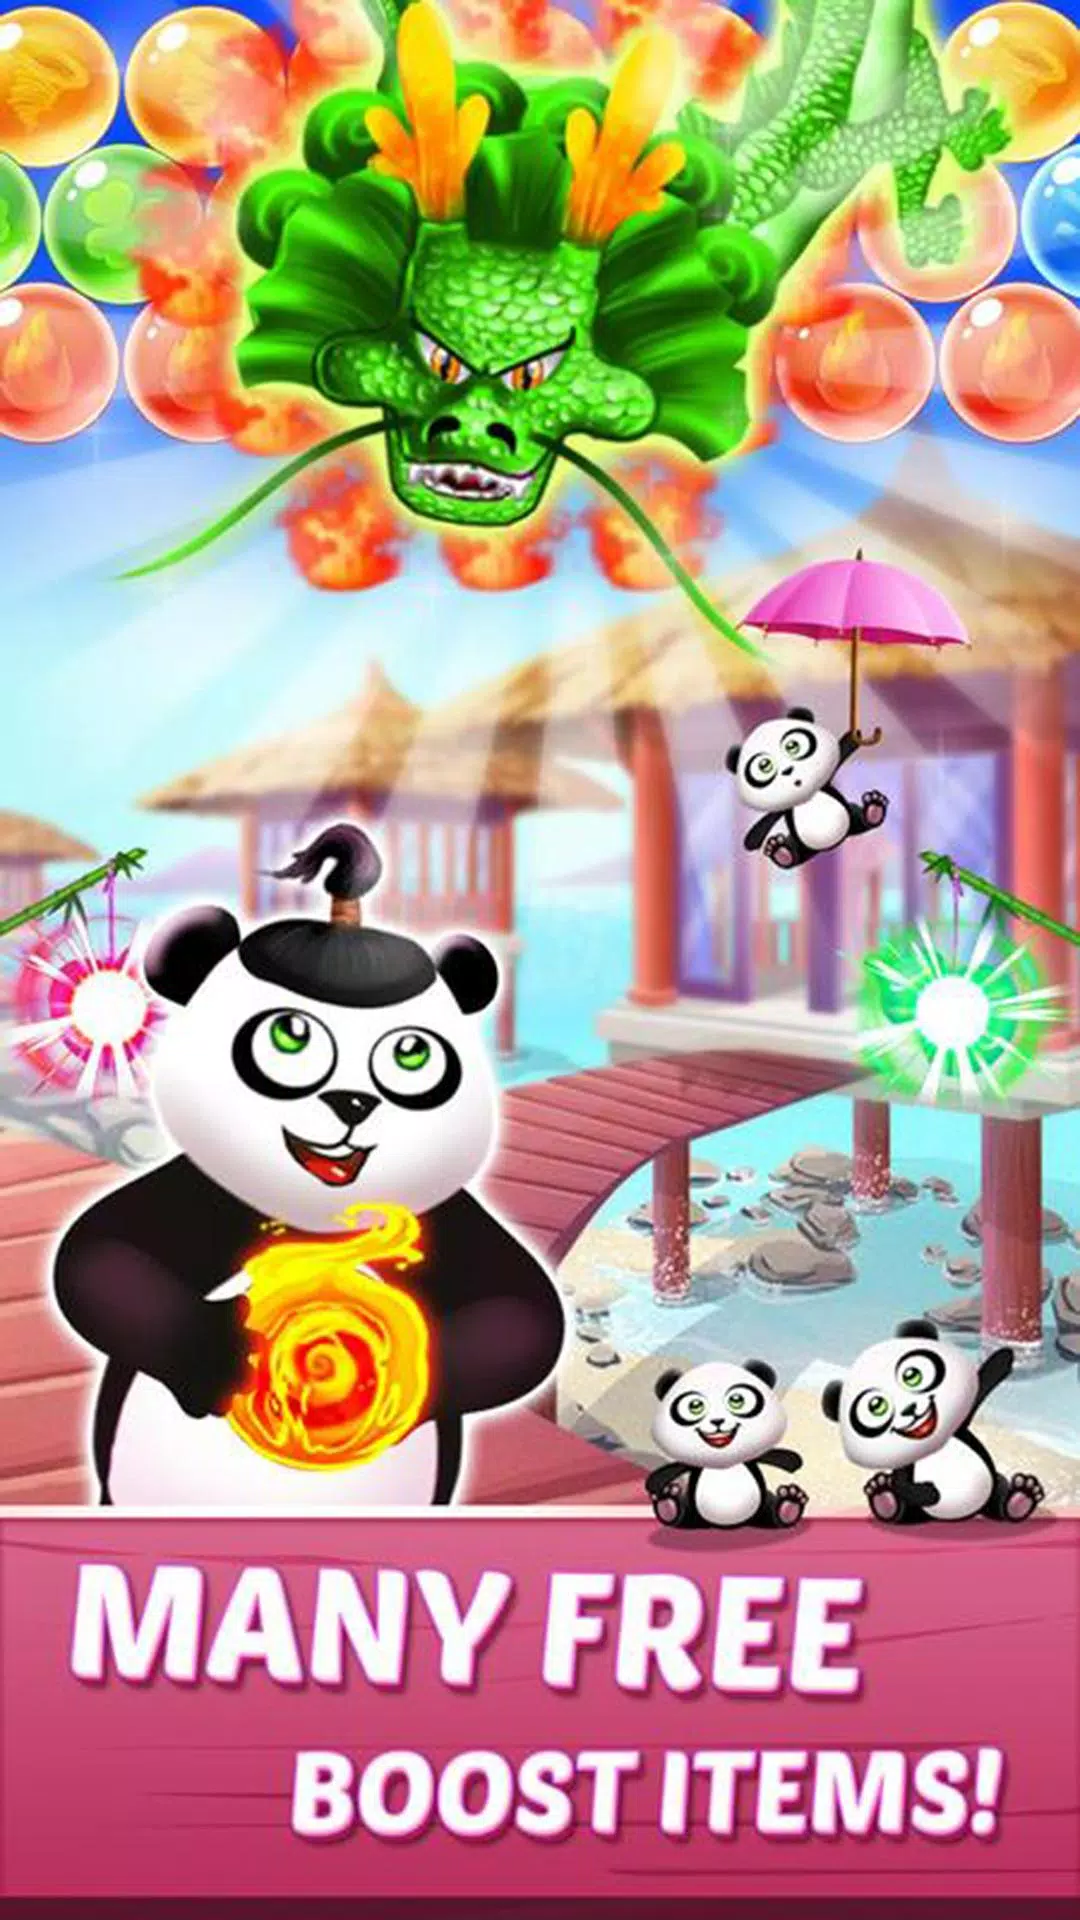 Bubble Shooter: Cute Panda Pop 2020 for Android - APK Download